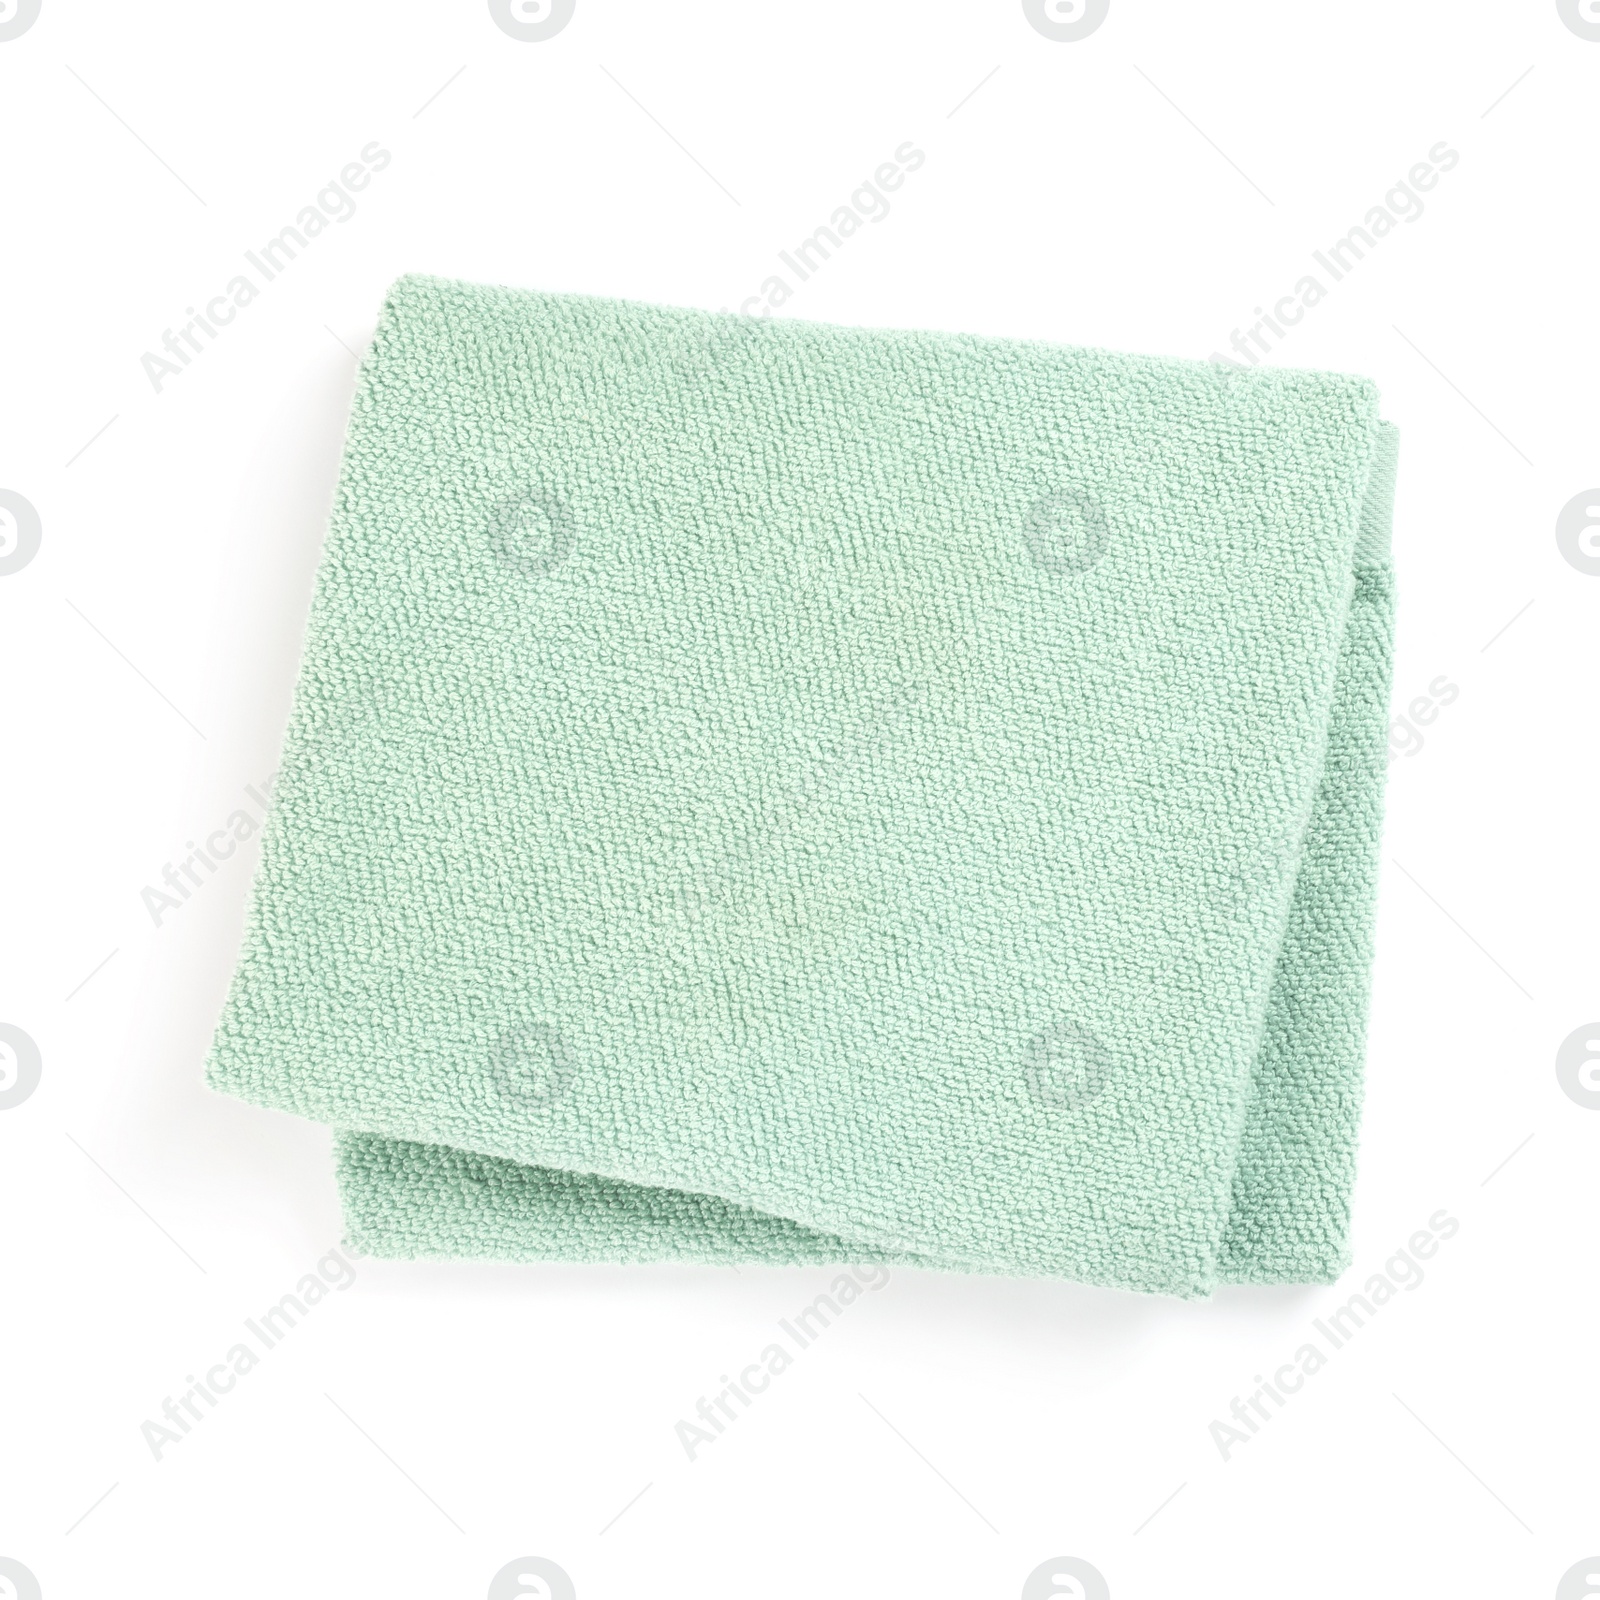 Photo of Soft colorful terry towel isolated on white, top view